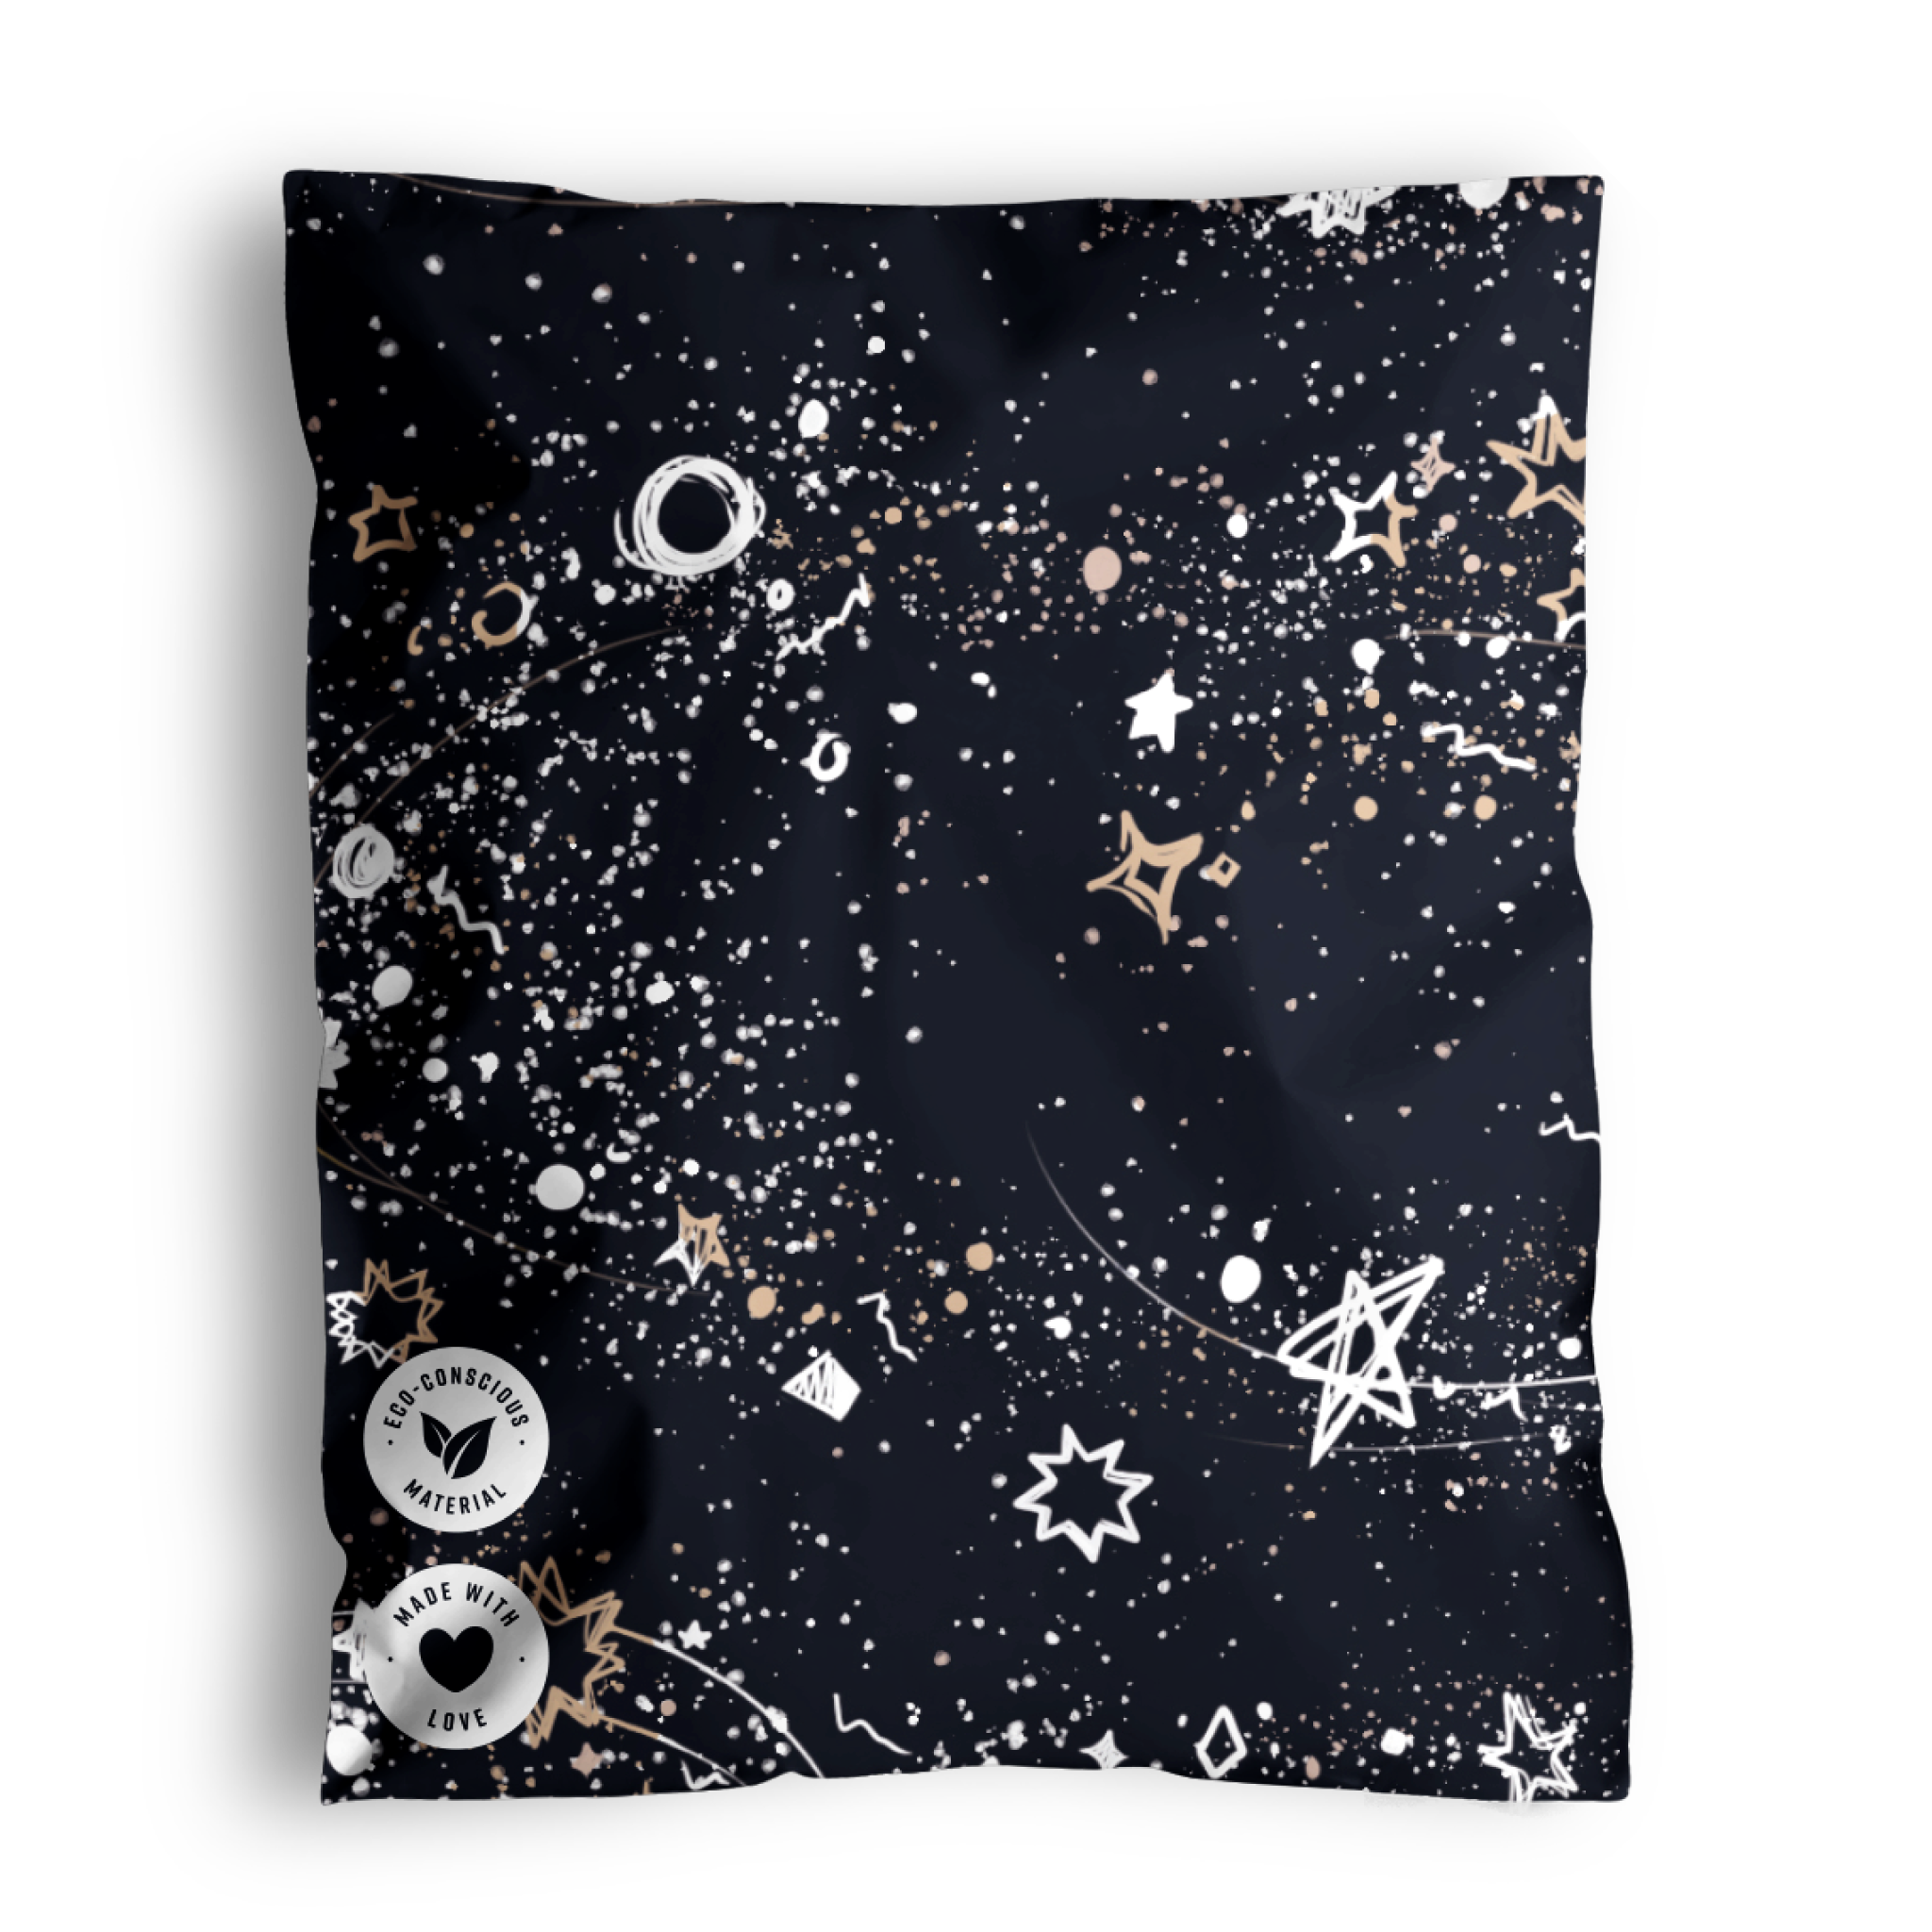 A recyclable Midnight Galaxy Mailers 10" x 13" with a celestial pattern including stars, planets, and various cosmic elements, labeled with "impack.co.